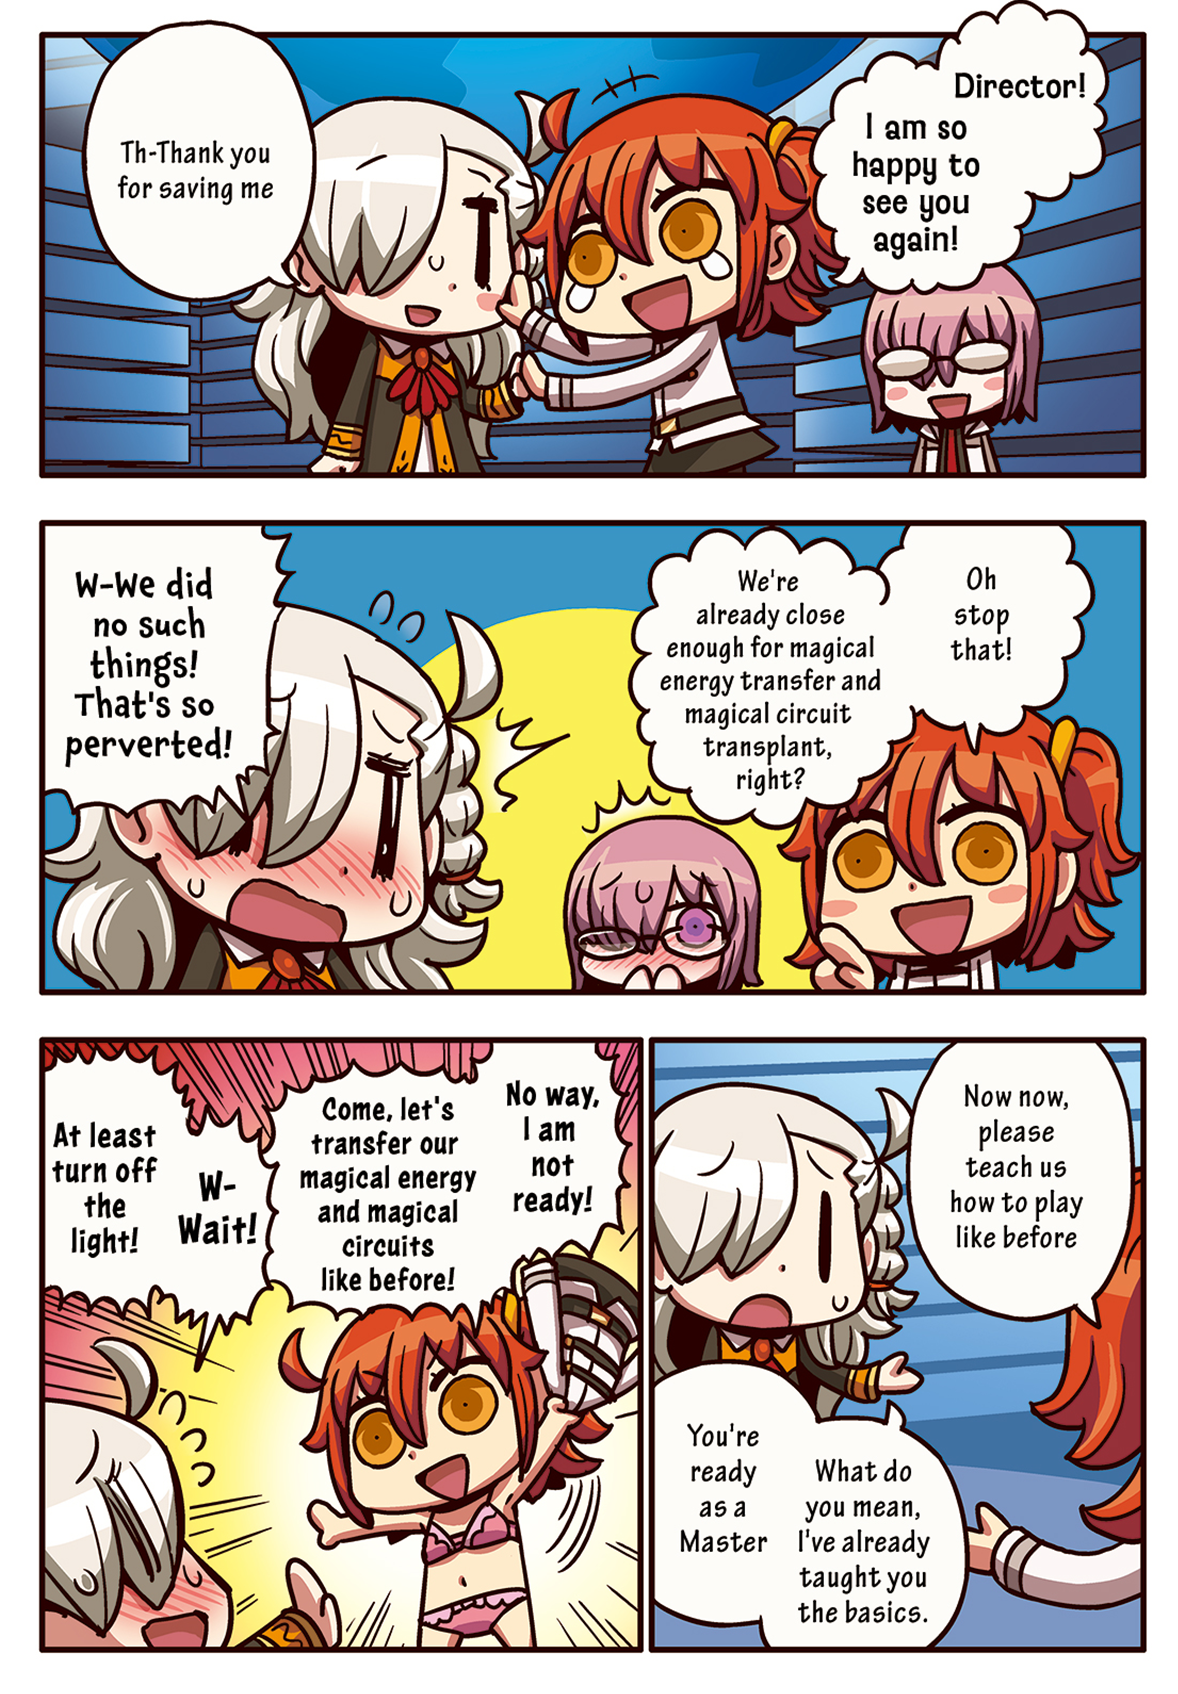 Episode 1 More Learning with Manga! Fate/Grand Order